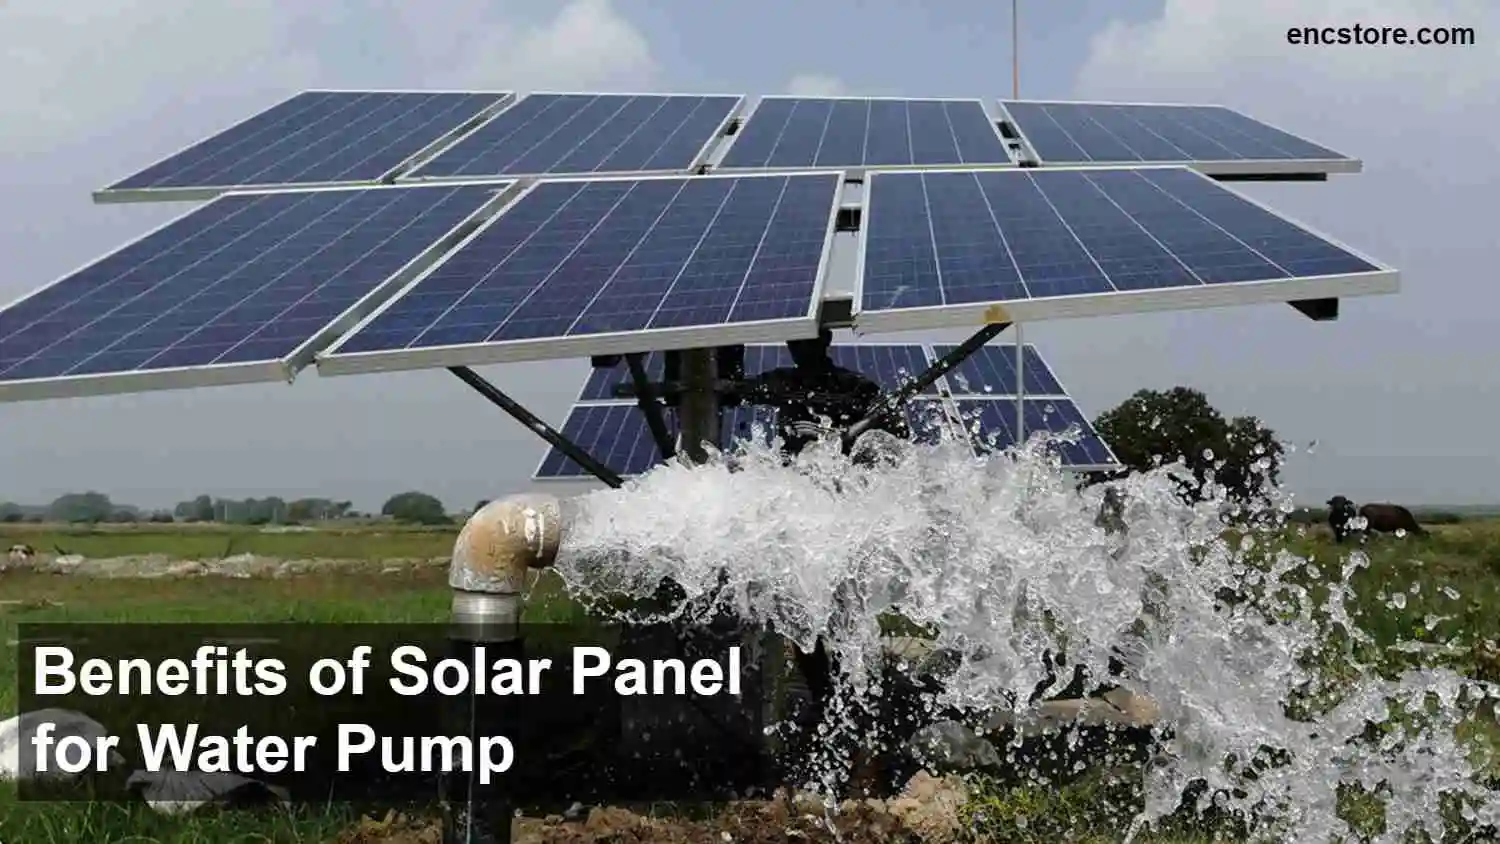 Benefits of Solar Panel for Water Pump